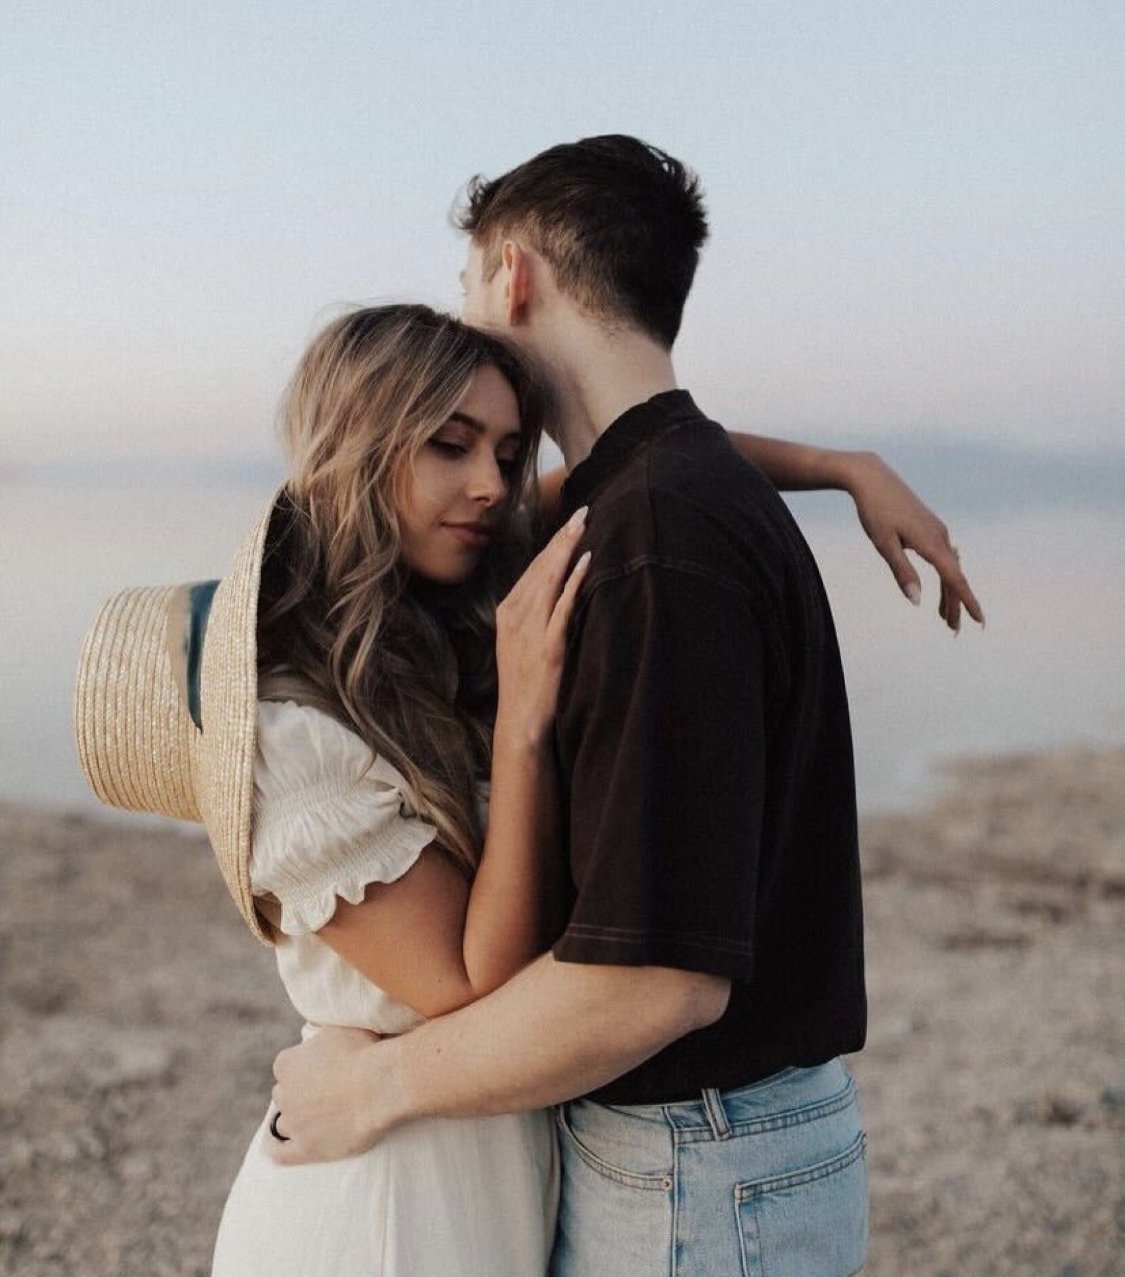 Couple beach pose inspo! 🌊 | Gallery posted by Anna Schmidt | Lemon8